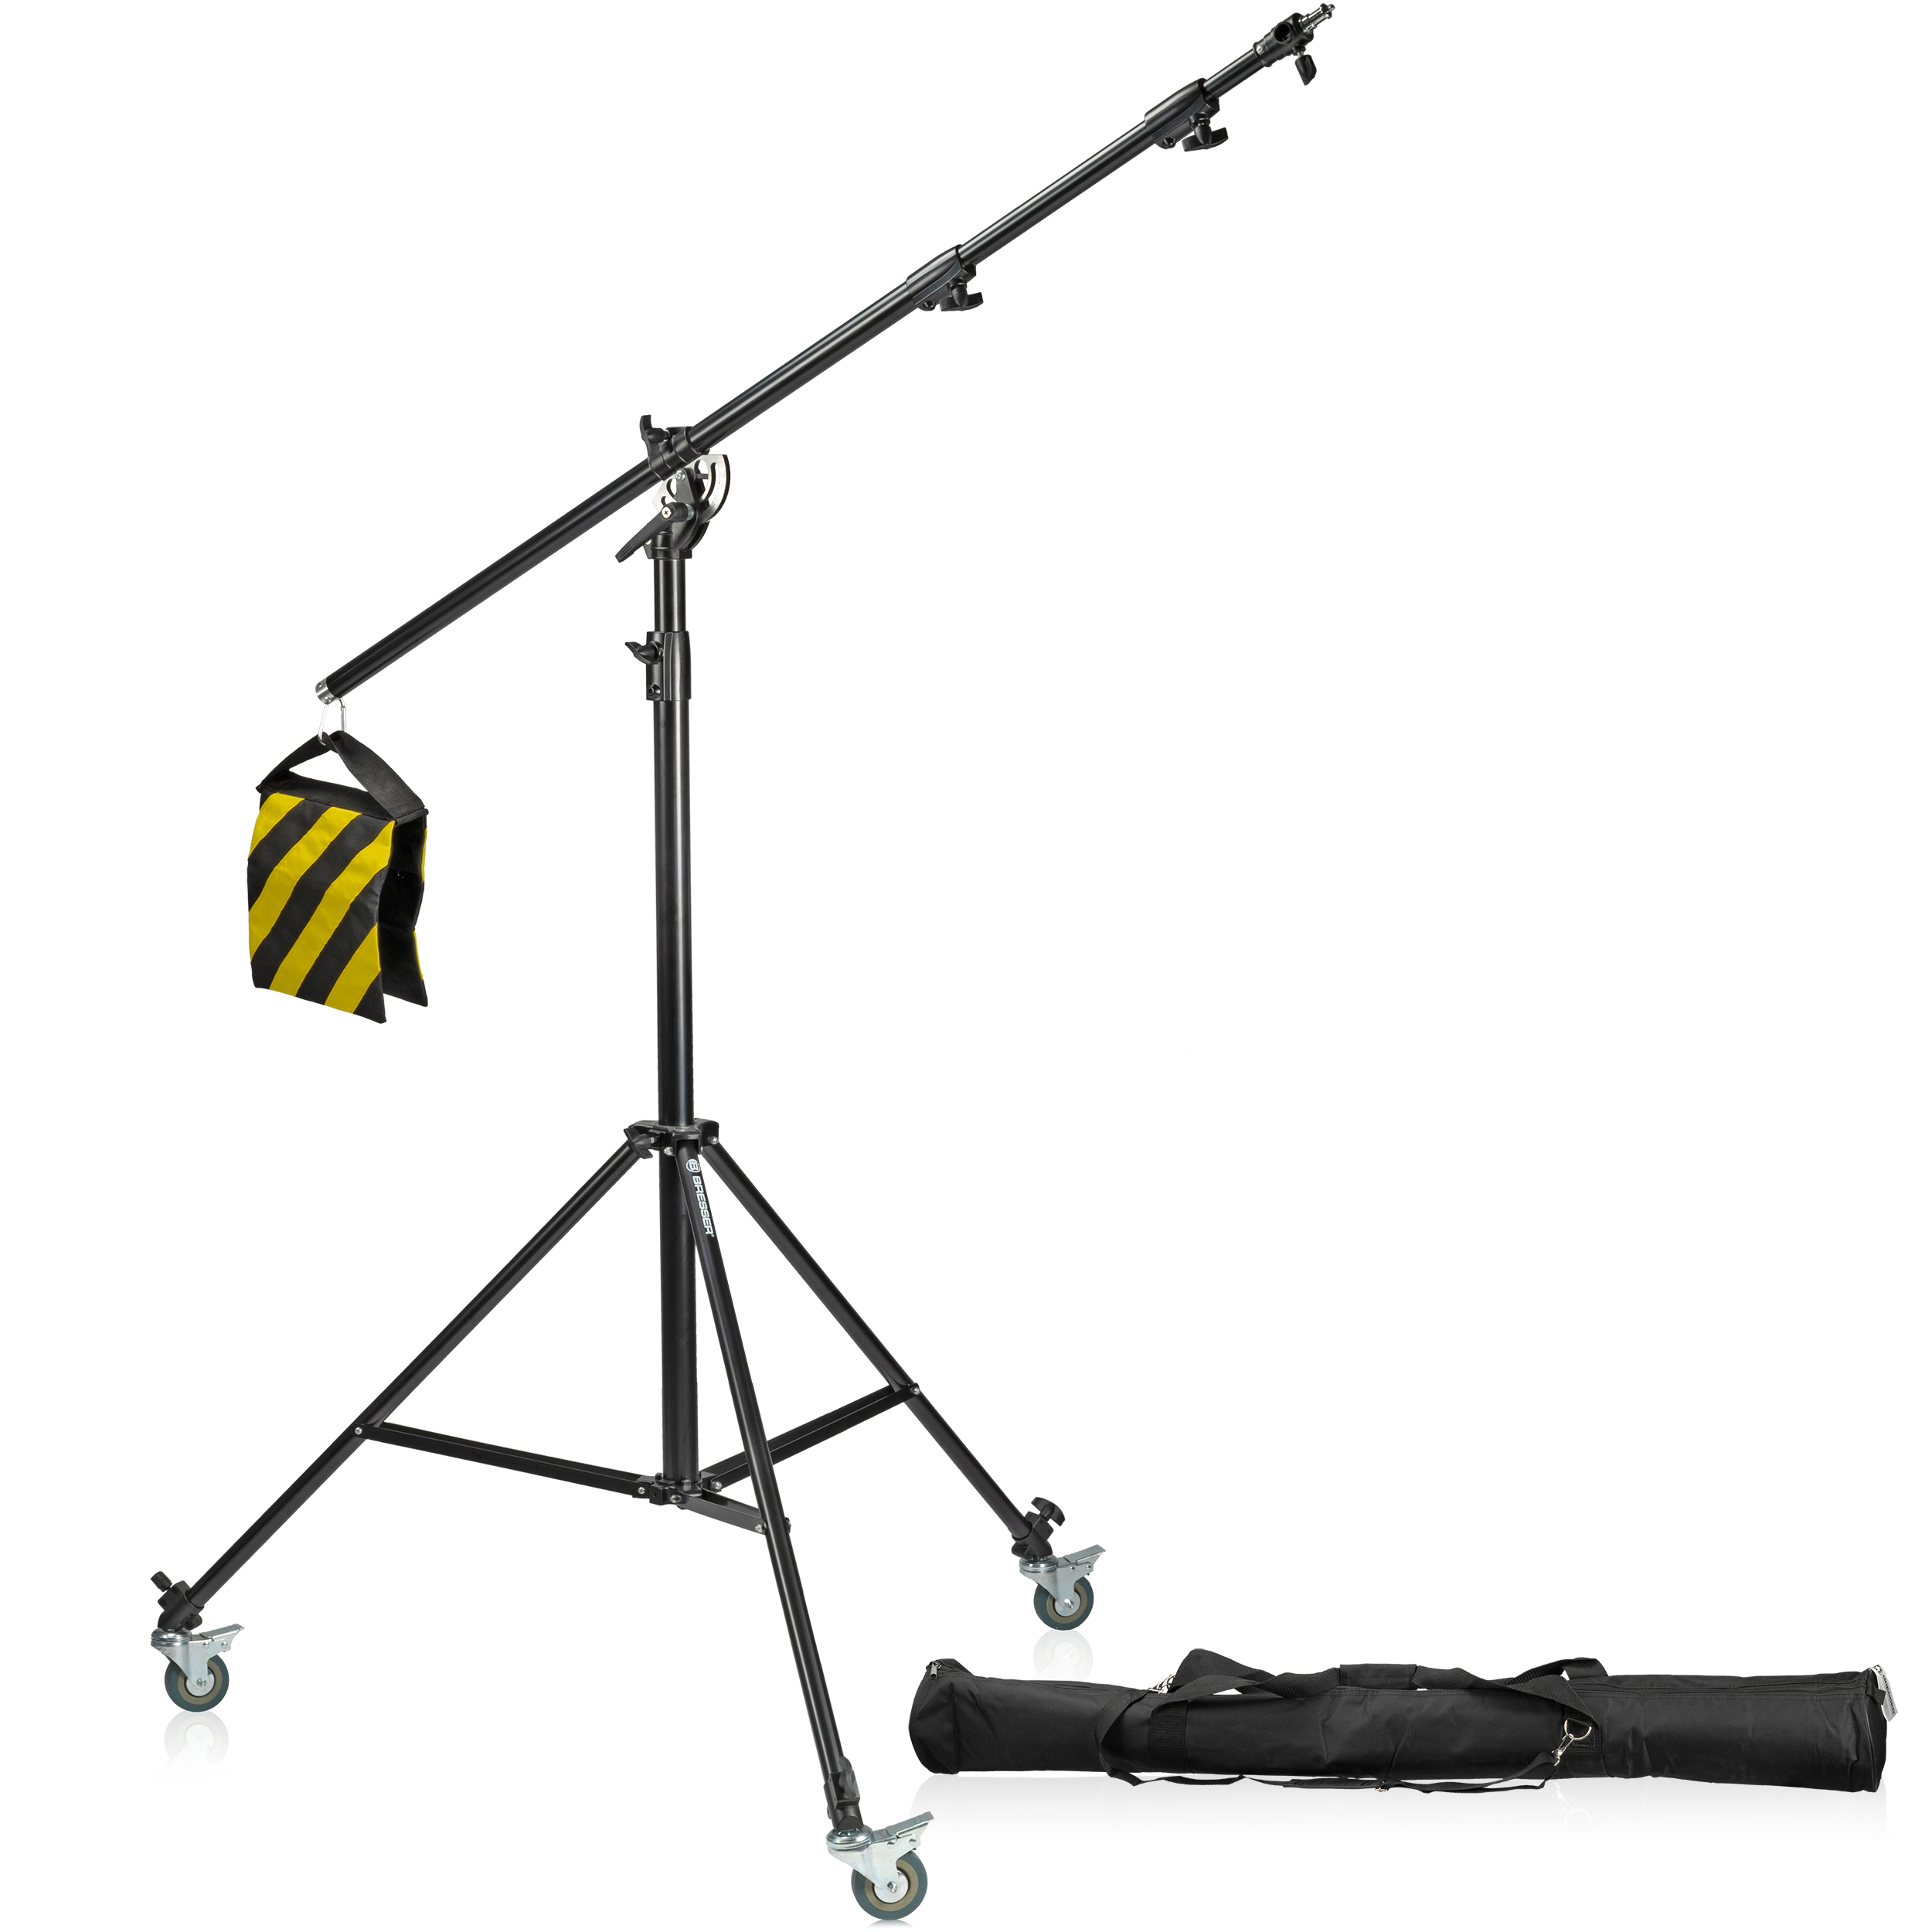 BRESSER BR-LB300 Light Stand with Swivel Arm and Wheels